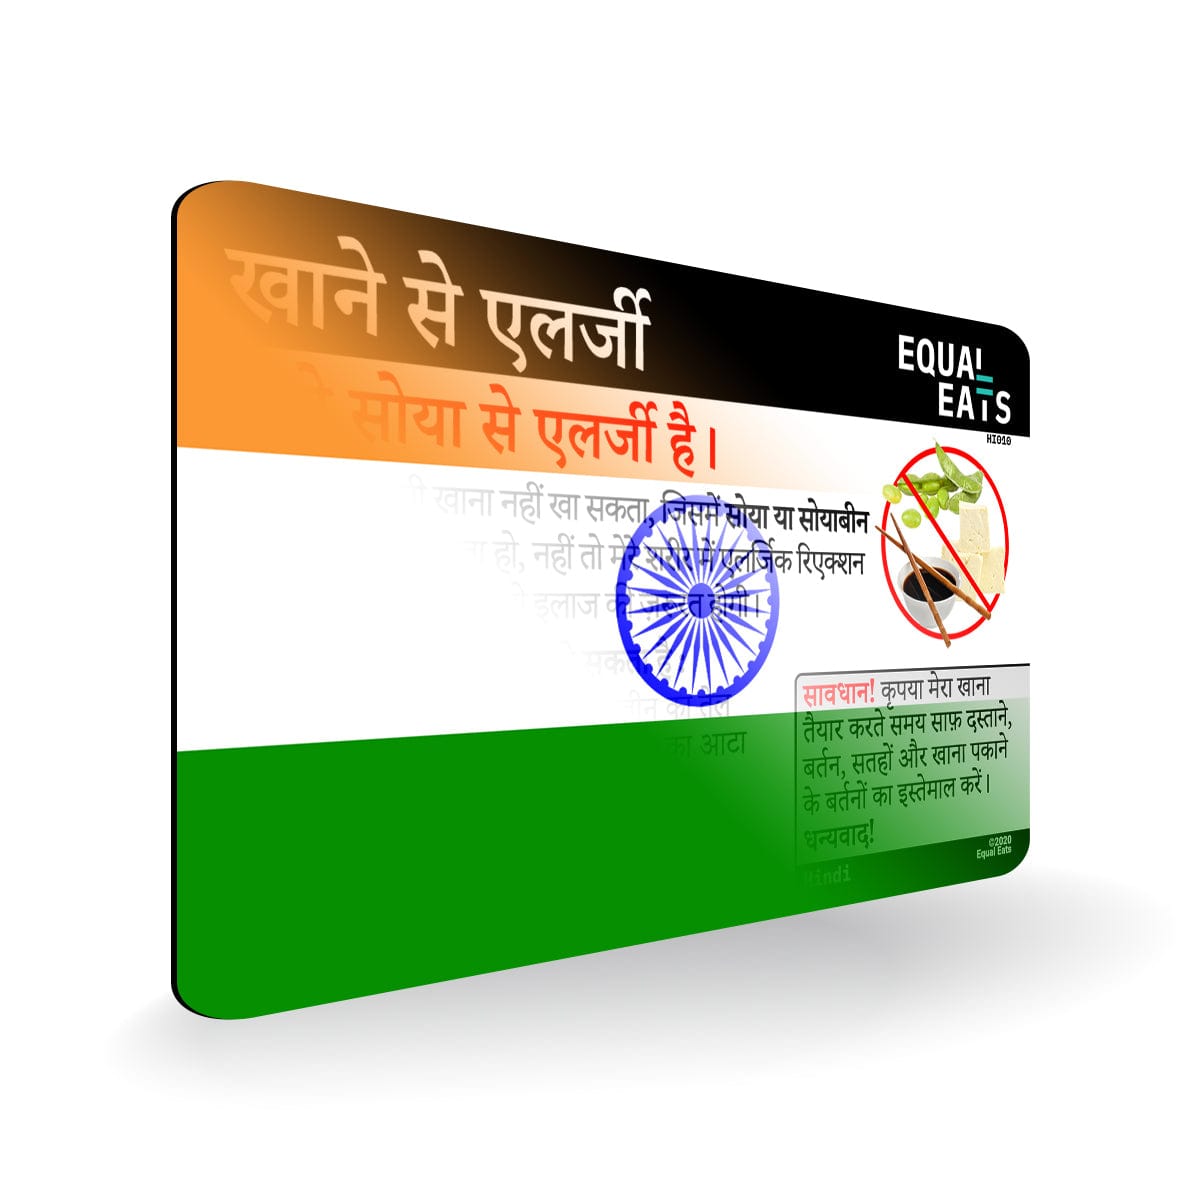 Soy Allergy in Hindi. Soy Allergy Card for India